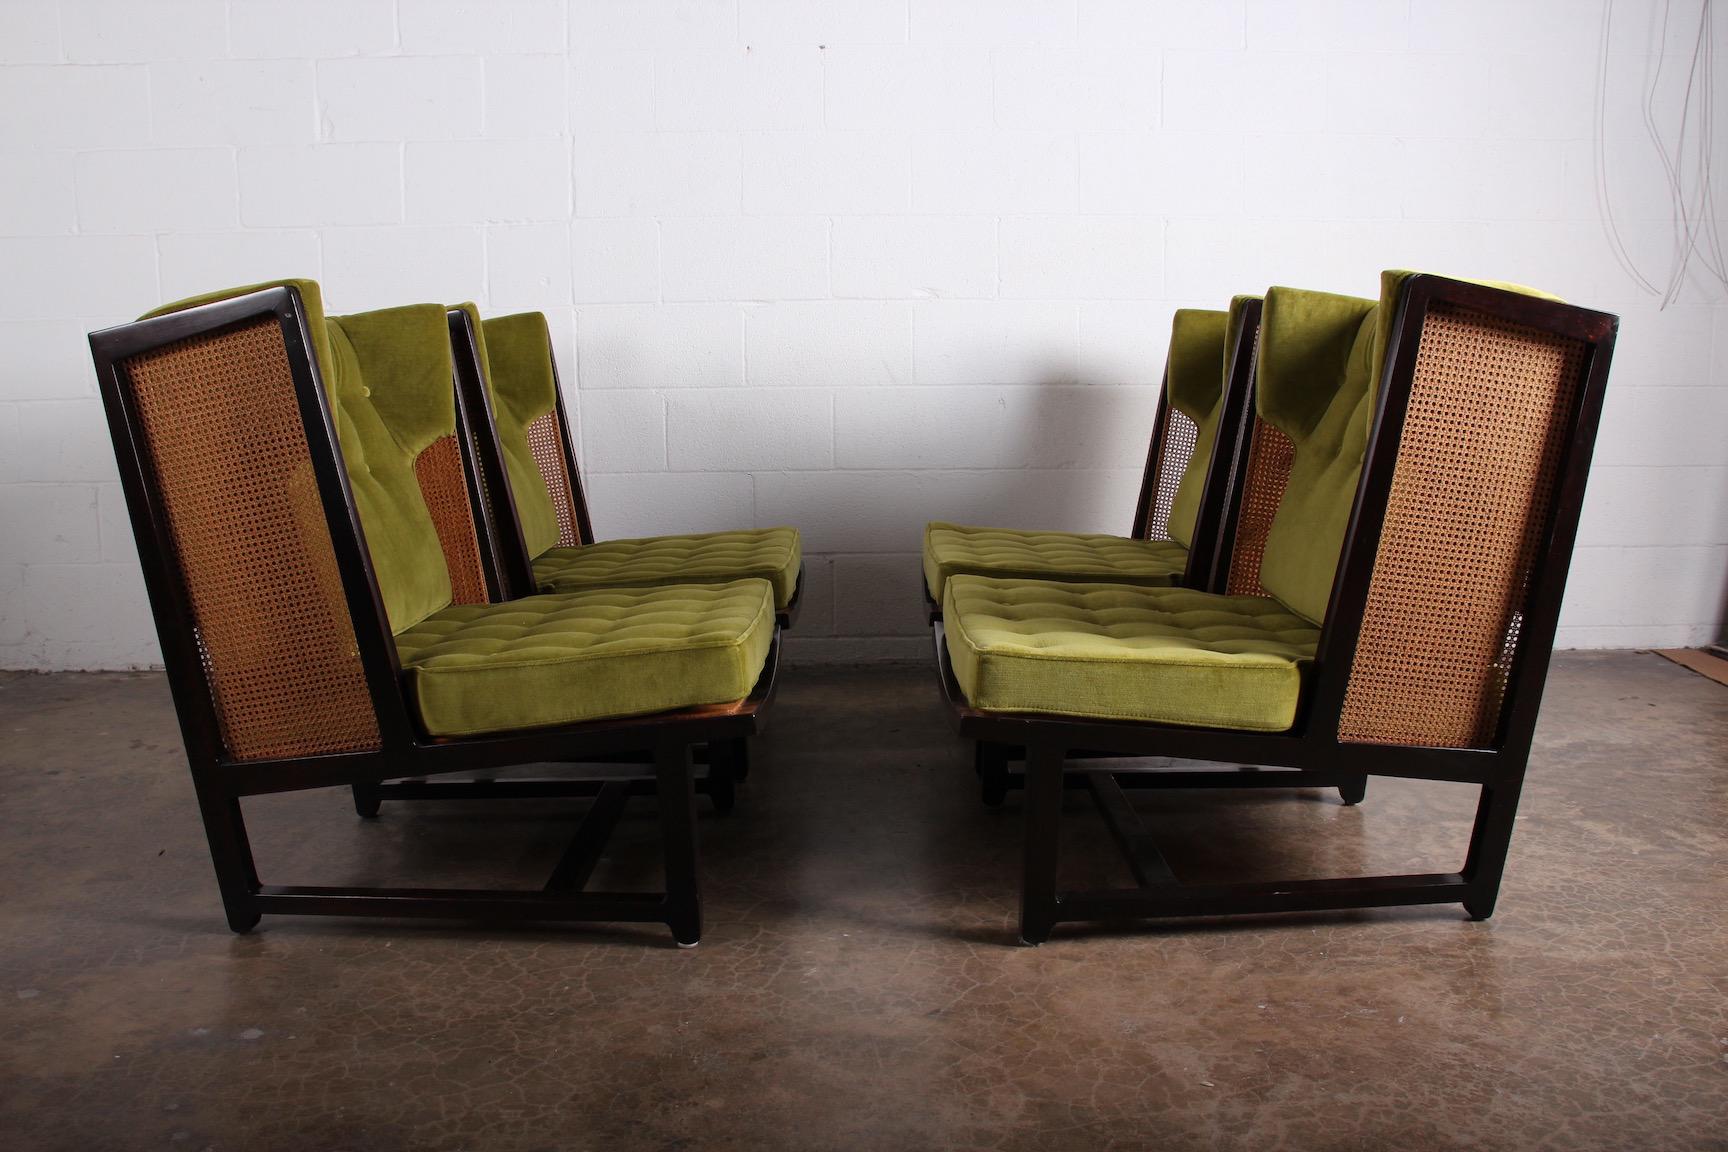 Mid-20th Century Four Cane Back Wing Chairs by Edward Wormley for Dunbar